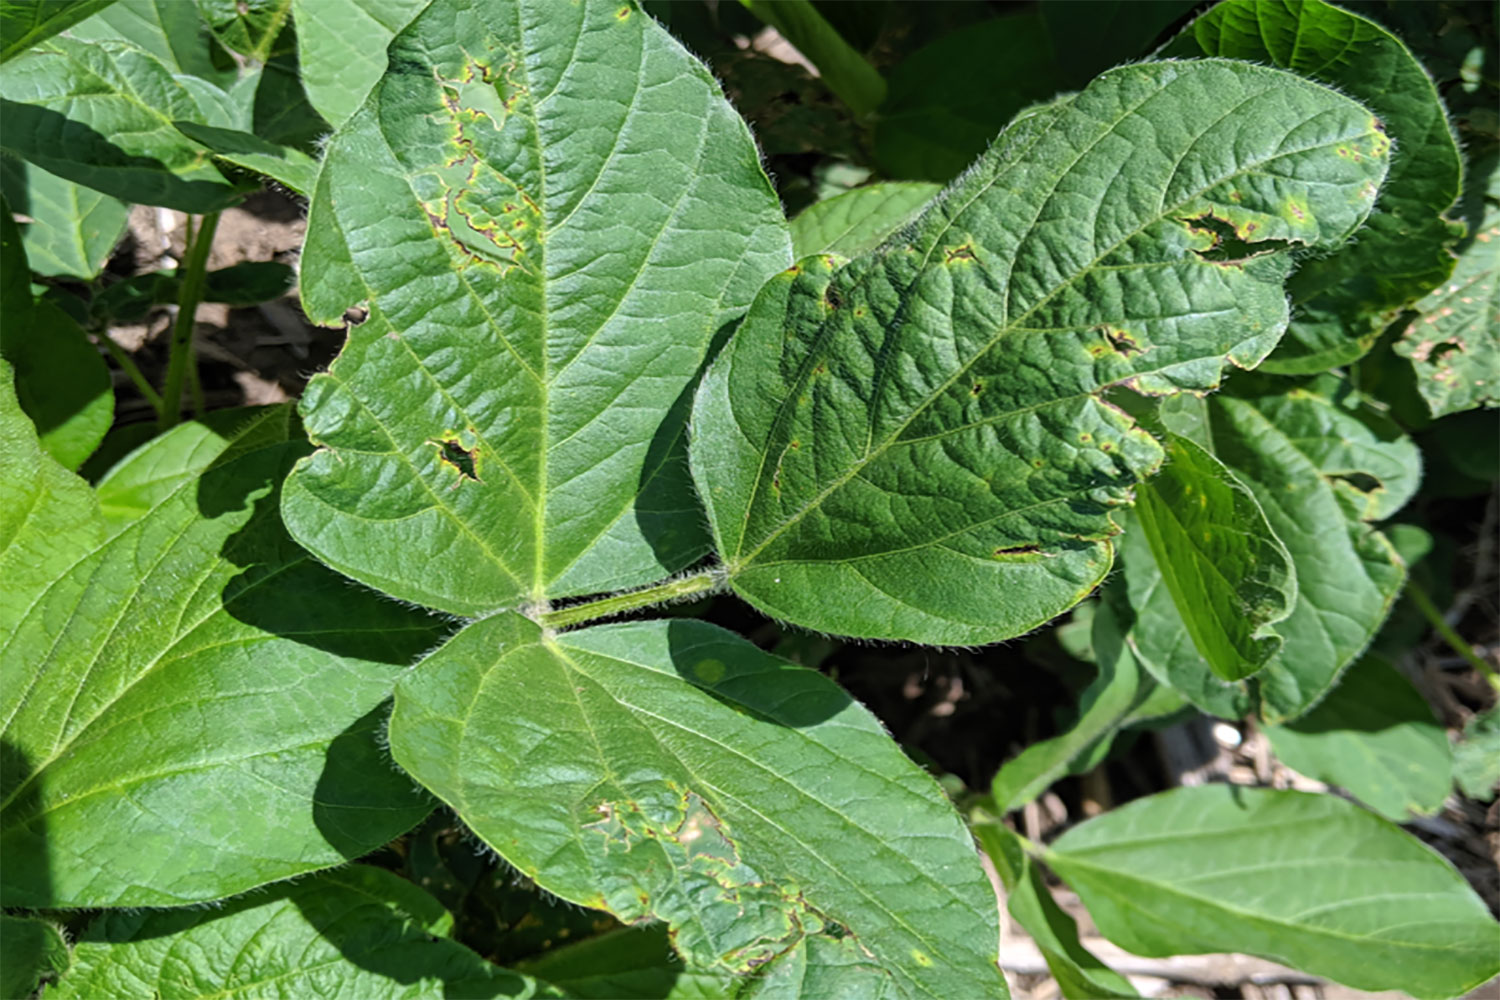 Soybean leaves with several bright green lesions progressing into tears with brown crusting along the edges.